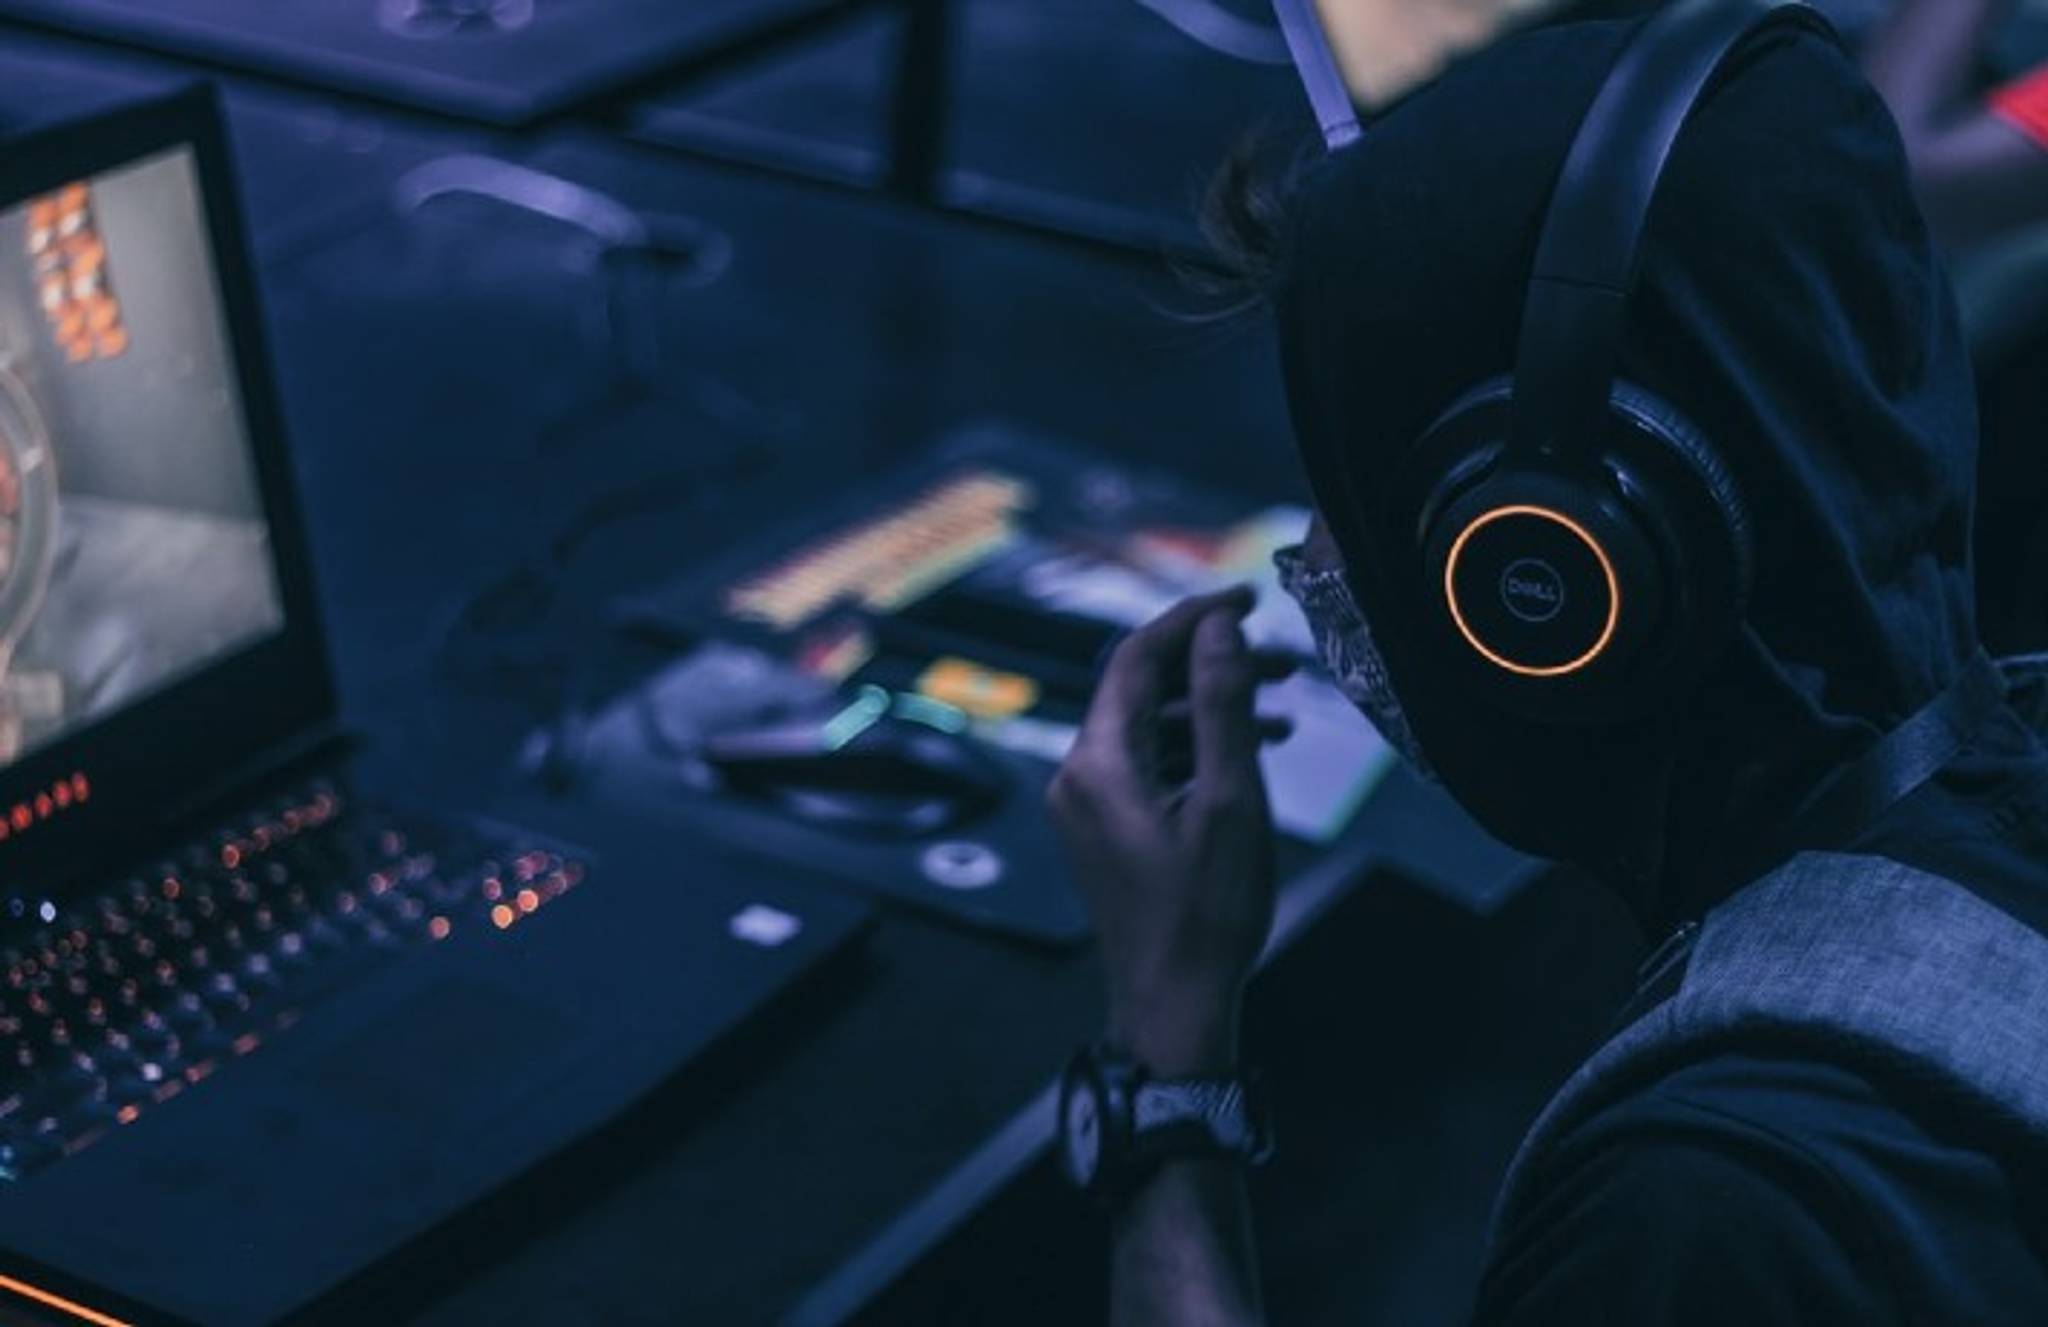 Fnatic x Gucci blends gaming culture and fashion hype